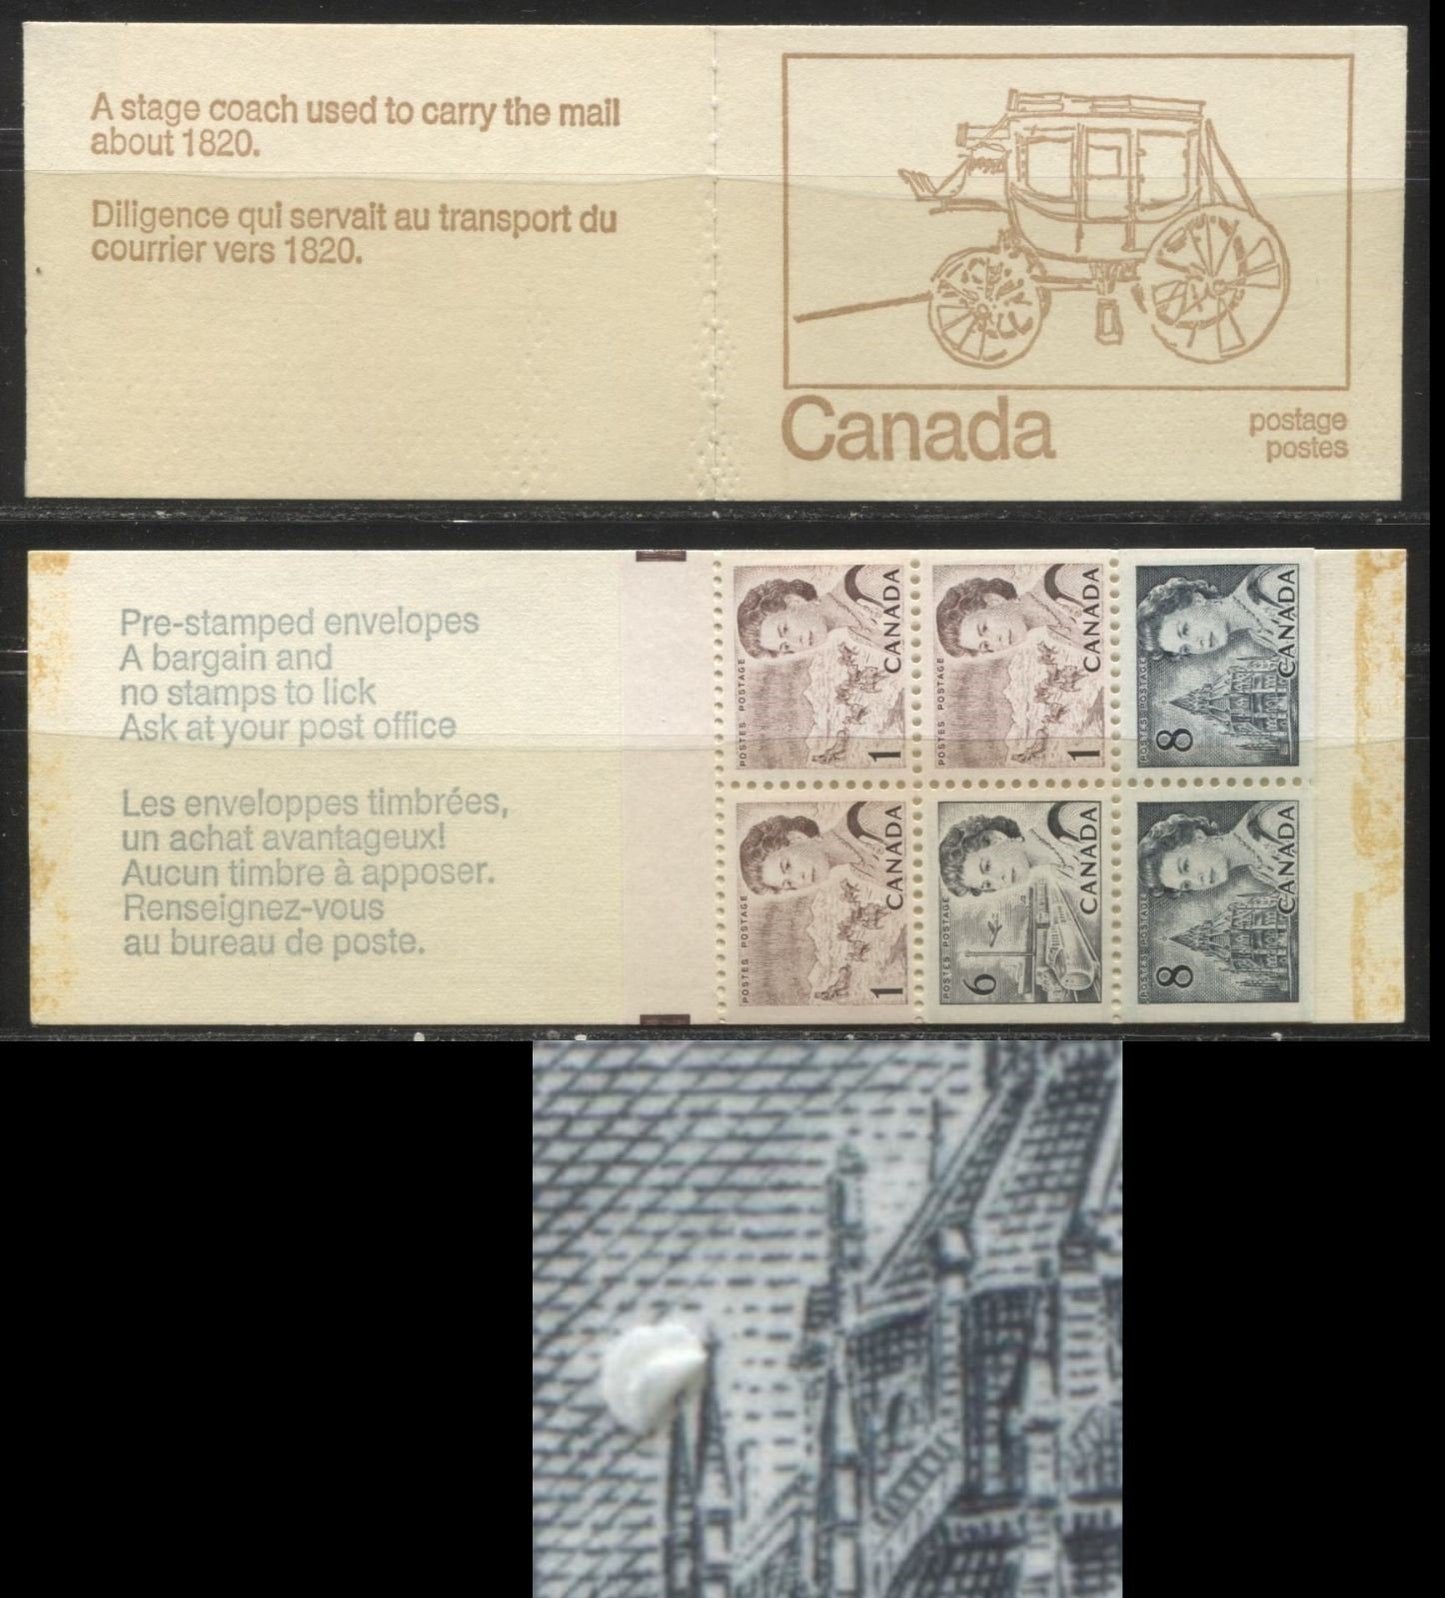 Lot #78 Canada McCann #BK69ad 1c Purple Brown, 6c Black, And 8c Slate, 1967-1973 Centennial Issue, A VFNH 25c Booklet, Type 3 Cover Black Sealing Strip, HF-fl Smooth Paper, Setting C, Showing "Cloud Near Left Spire" on 3/2